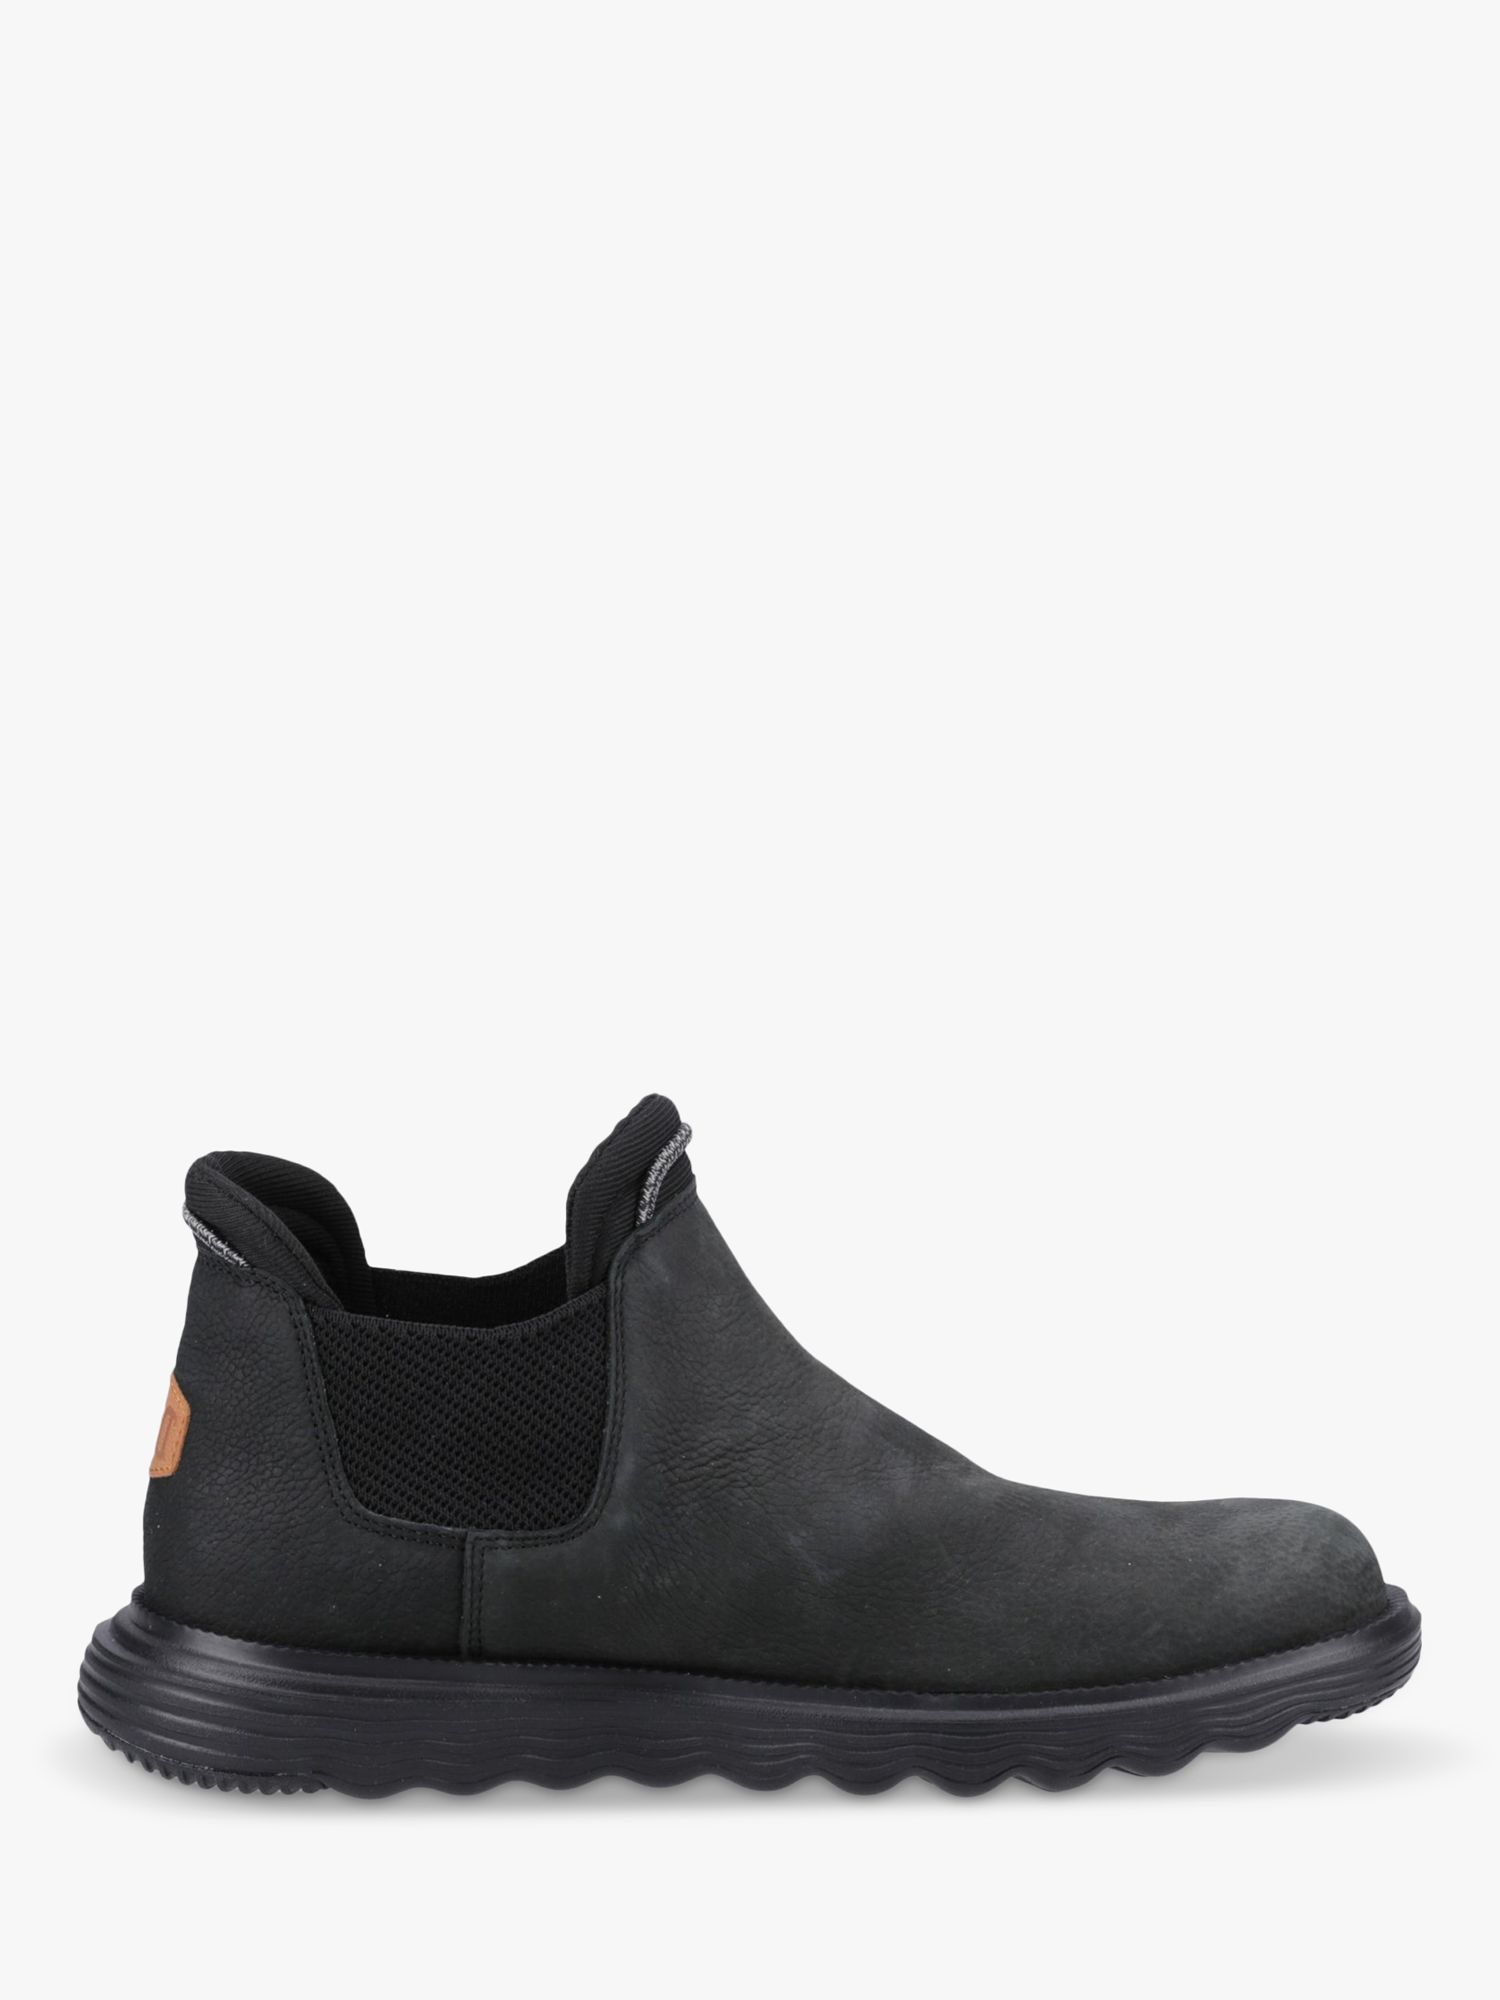 Hey Dude Branson Leather Chelsea Boots, Black at John Lewis & Partners